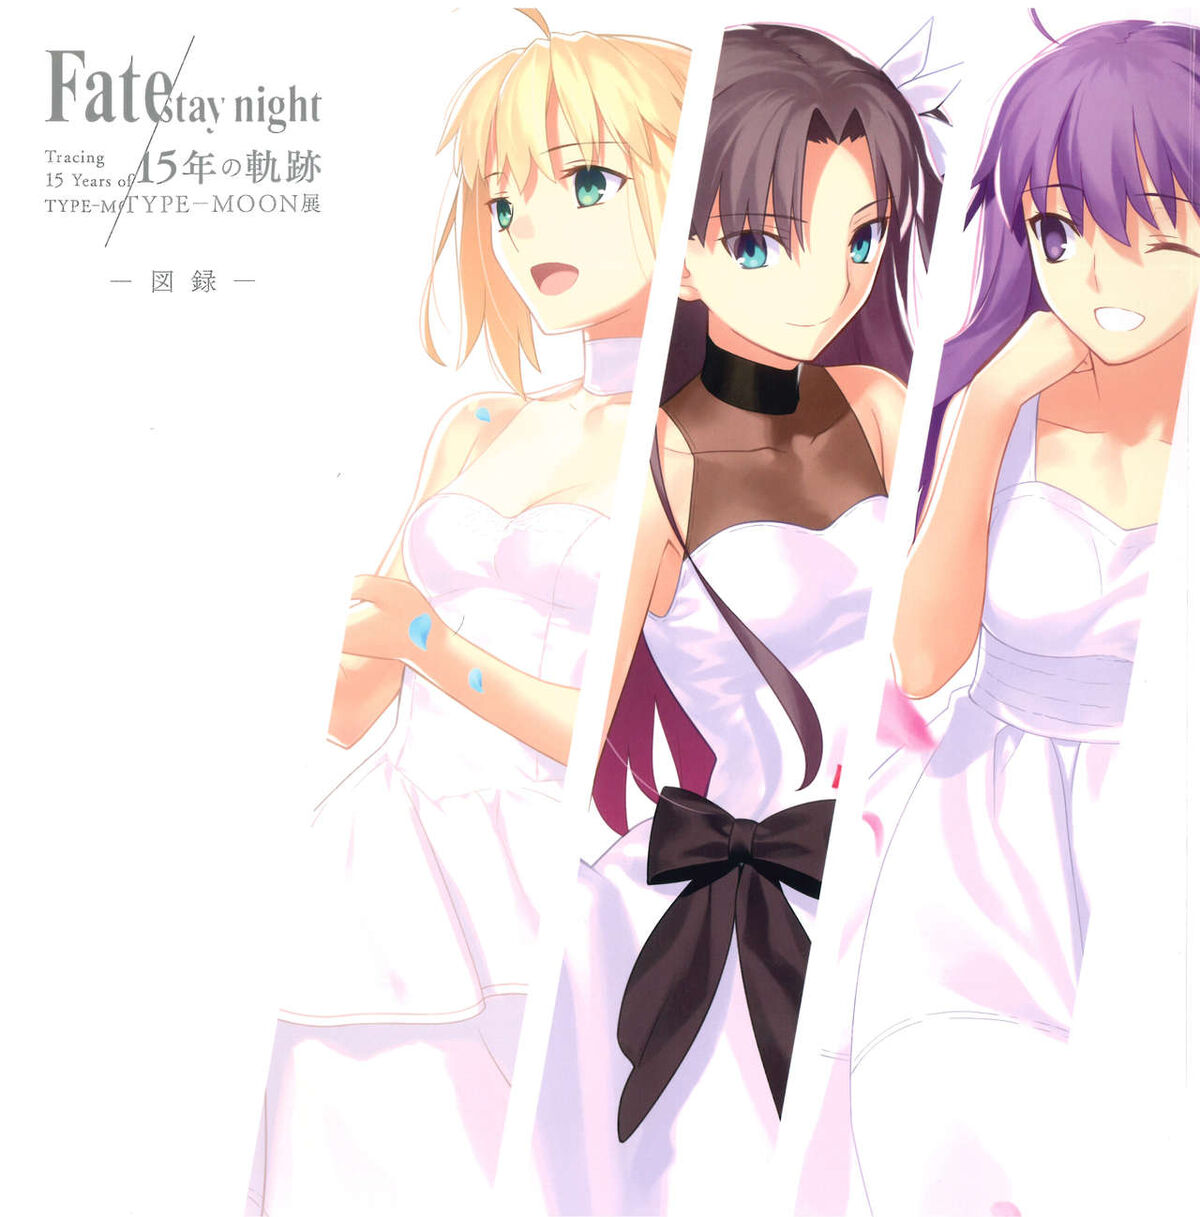 Fate/stay night - Tracing 15 Years of TYPE-MOON - | TYPE-MOON Wiki